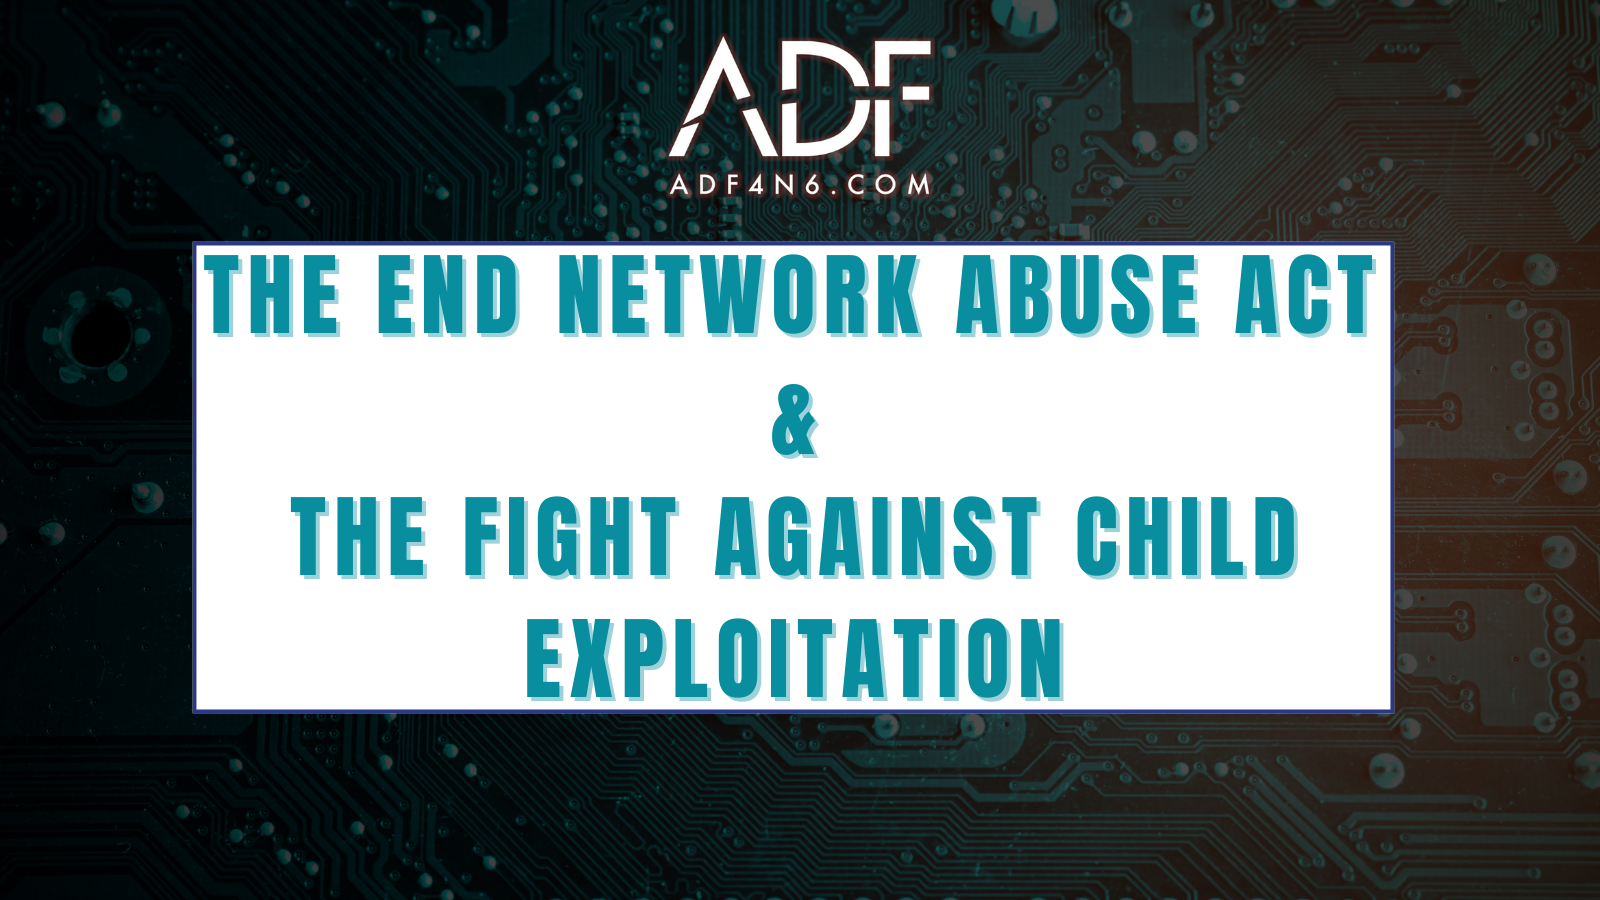 The END Network Abuse Act and the Fight Against Child Exploitation